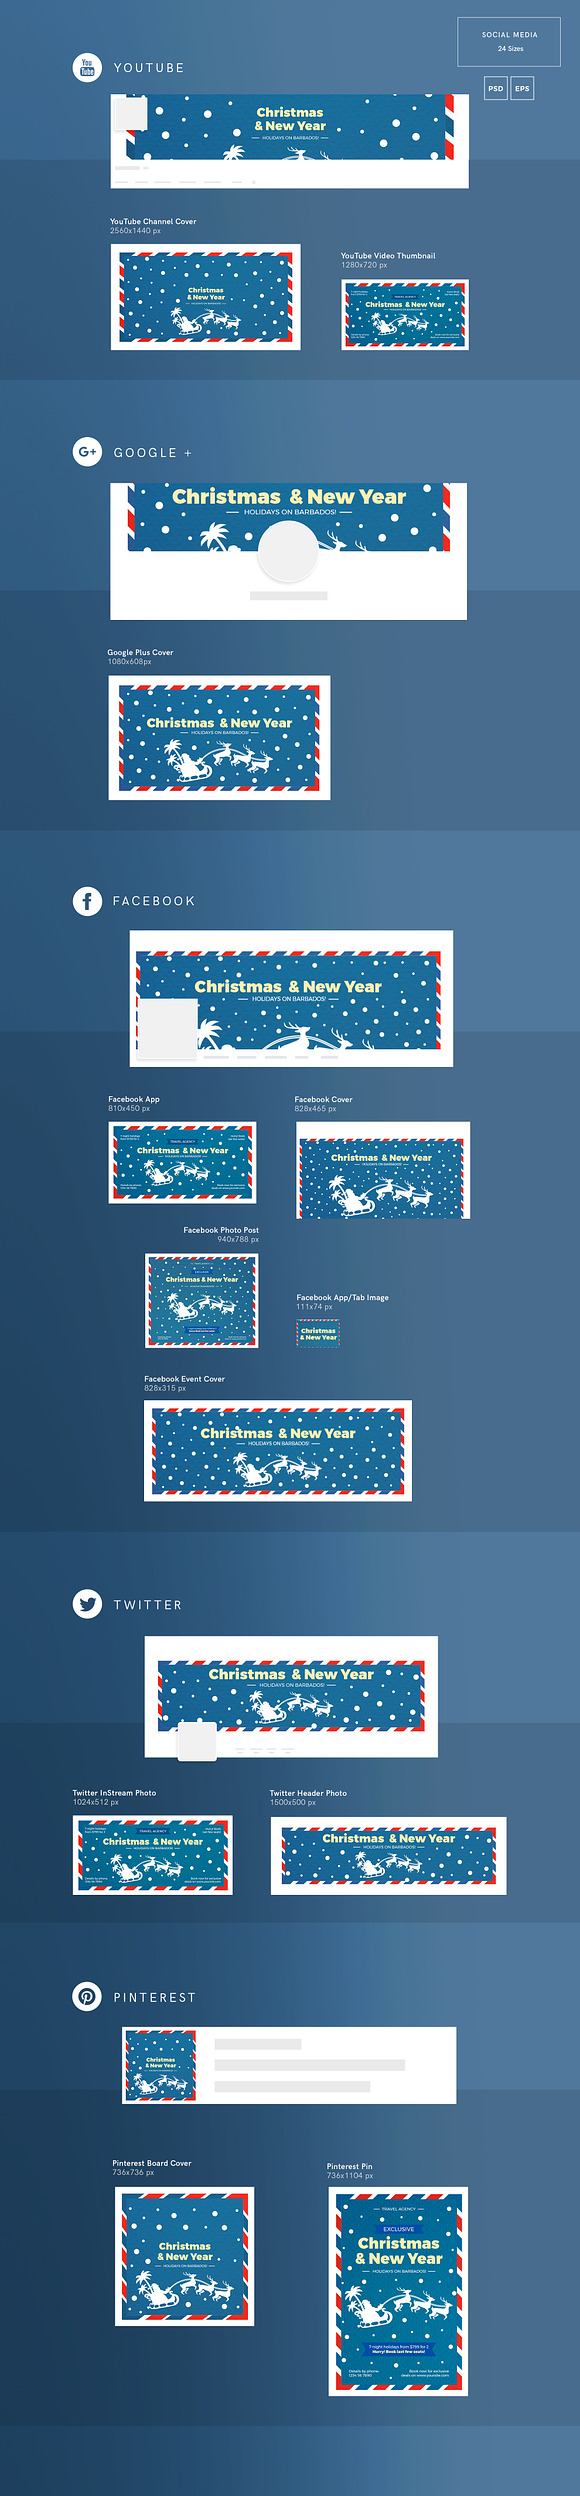 Social Media Pack | Christmas Travel in Social Media Templates - product preview 1